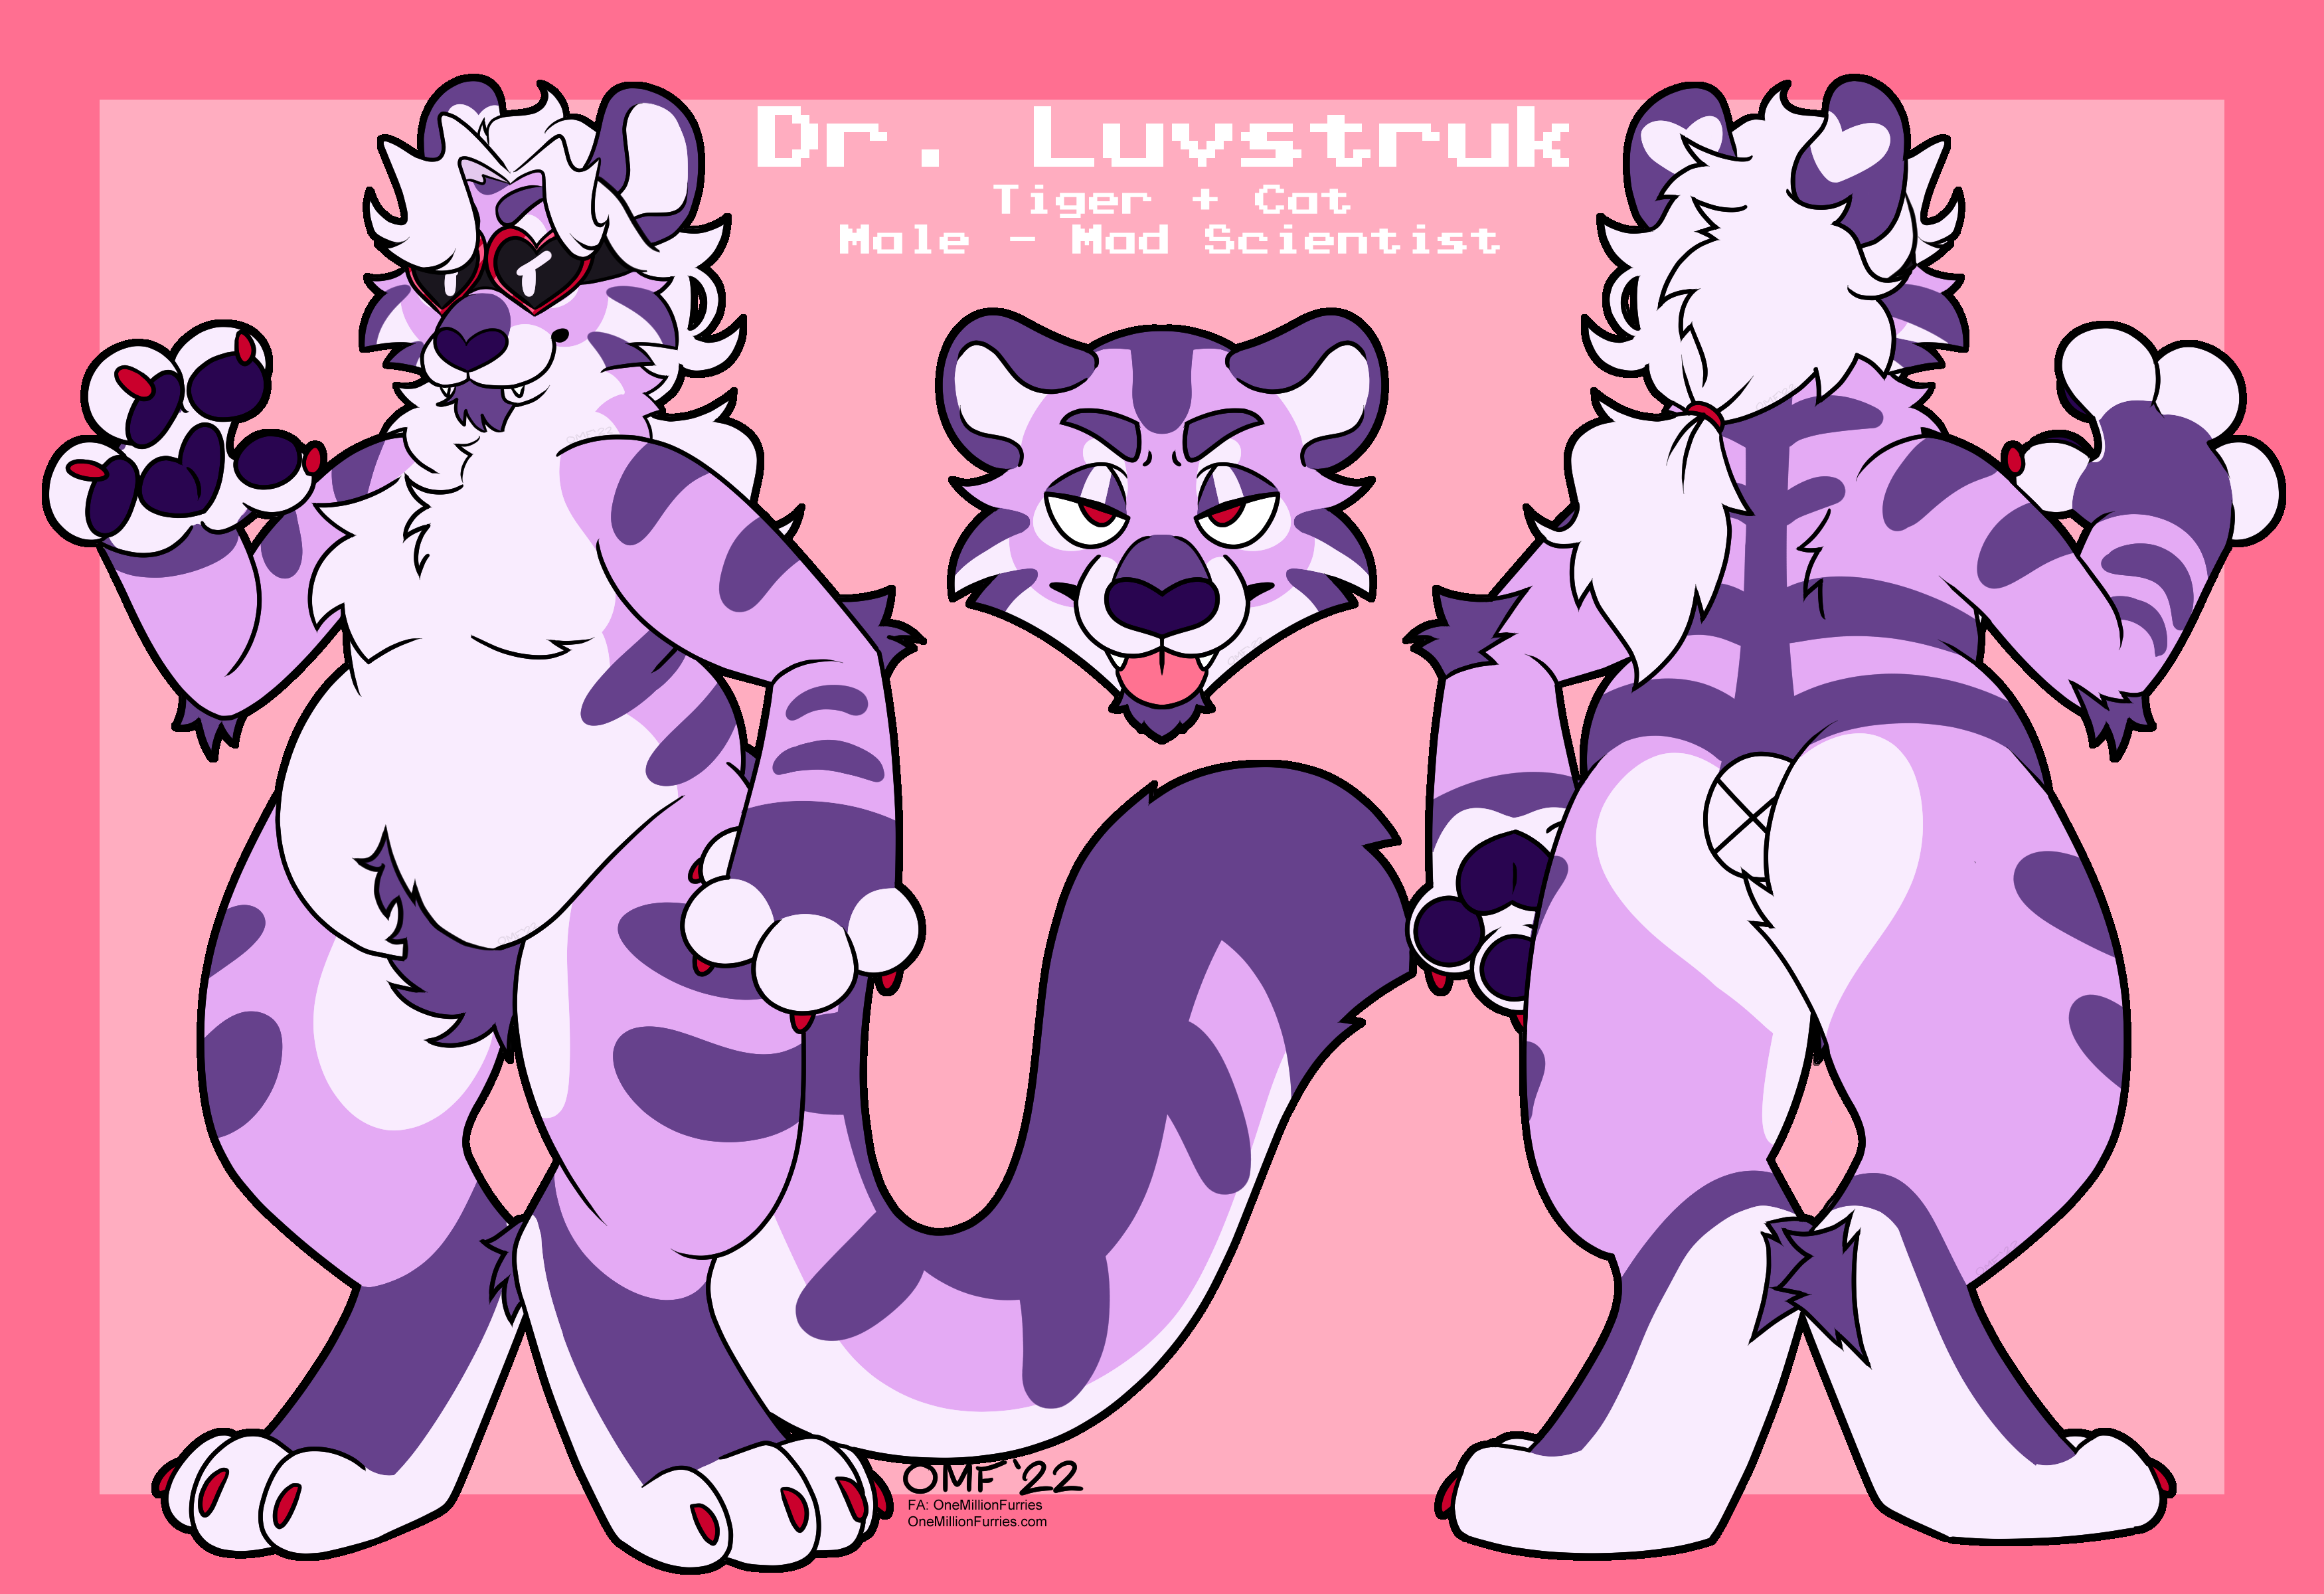 A reference sheet for the webmaster's fursona, Dr. Luvstruck. He is a purple anthro tiger-cat with long white hair tied into a ponytail. His belly is white and his stripes are dark purple, while the rest of his body is a lighter purple. He wears a pair of heart shaped goggles and is heavy set with a slight pear shape.